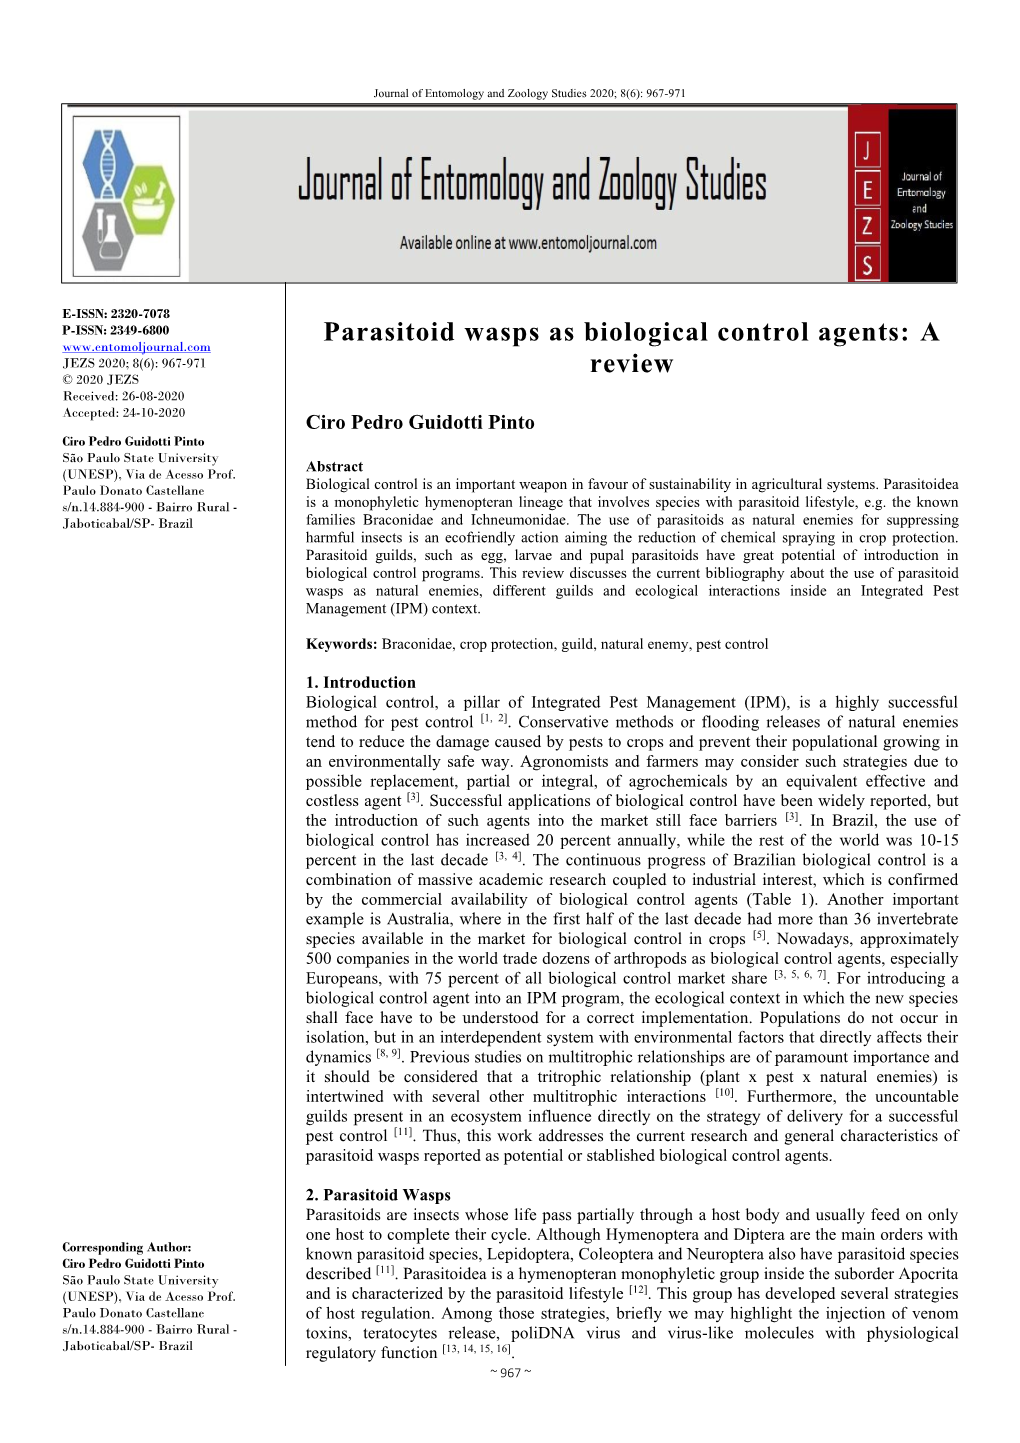 Parasitoid Wasps As Biological Control Agents: a Review